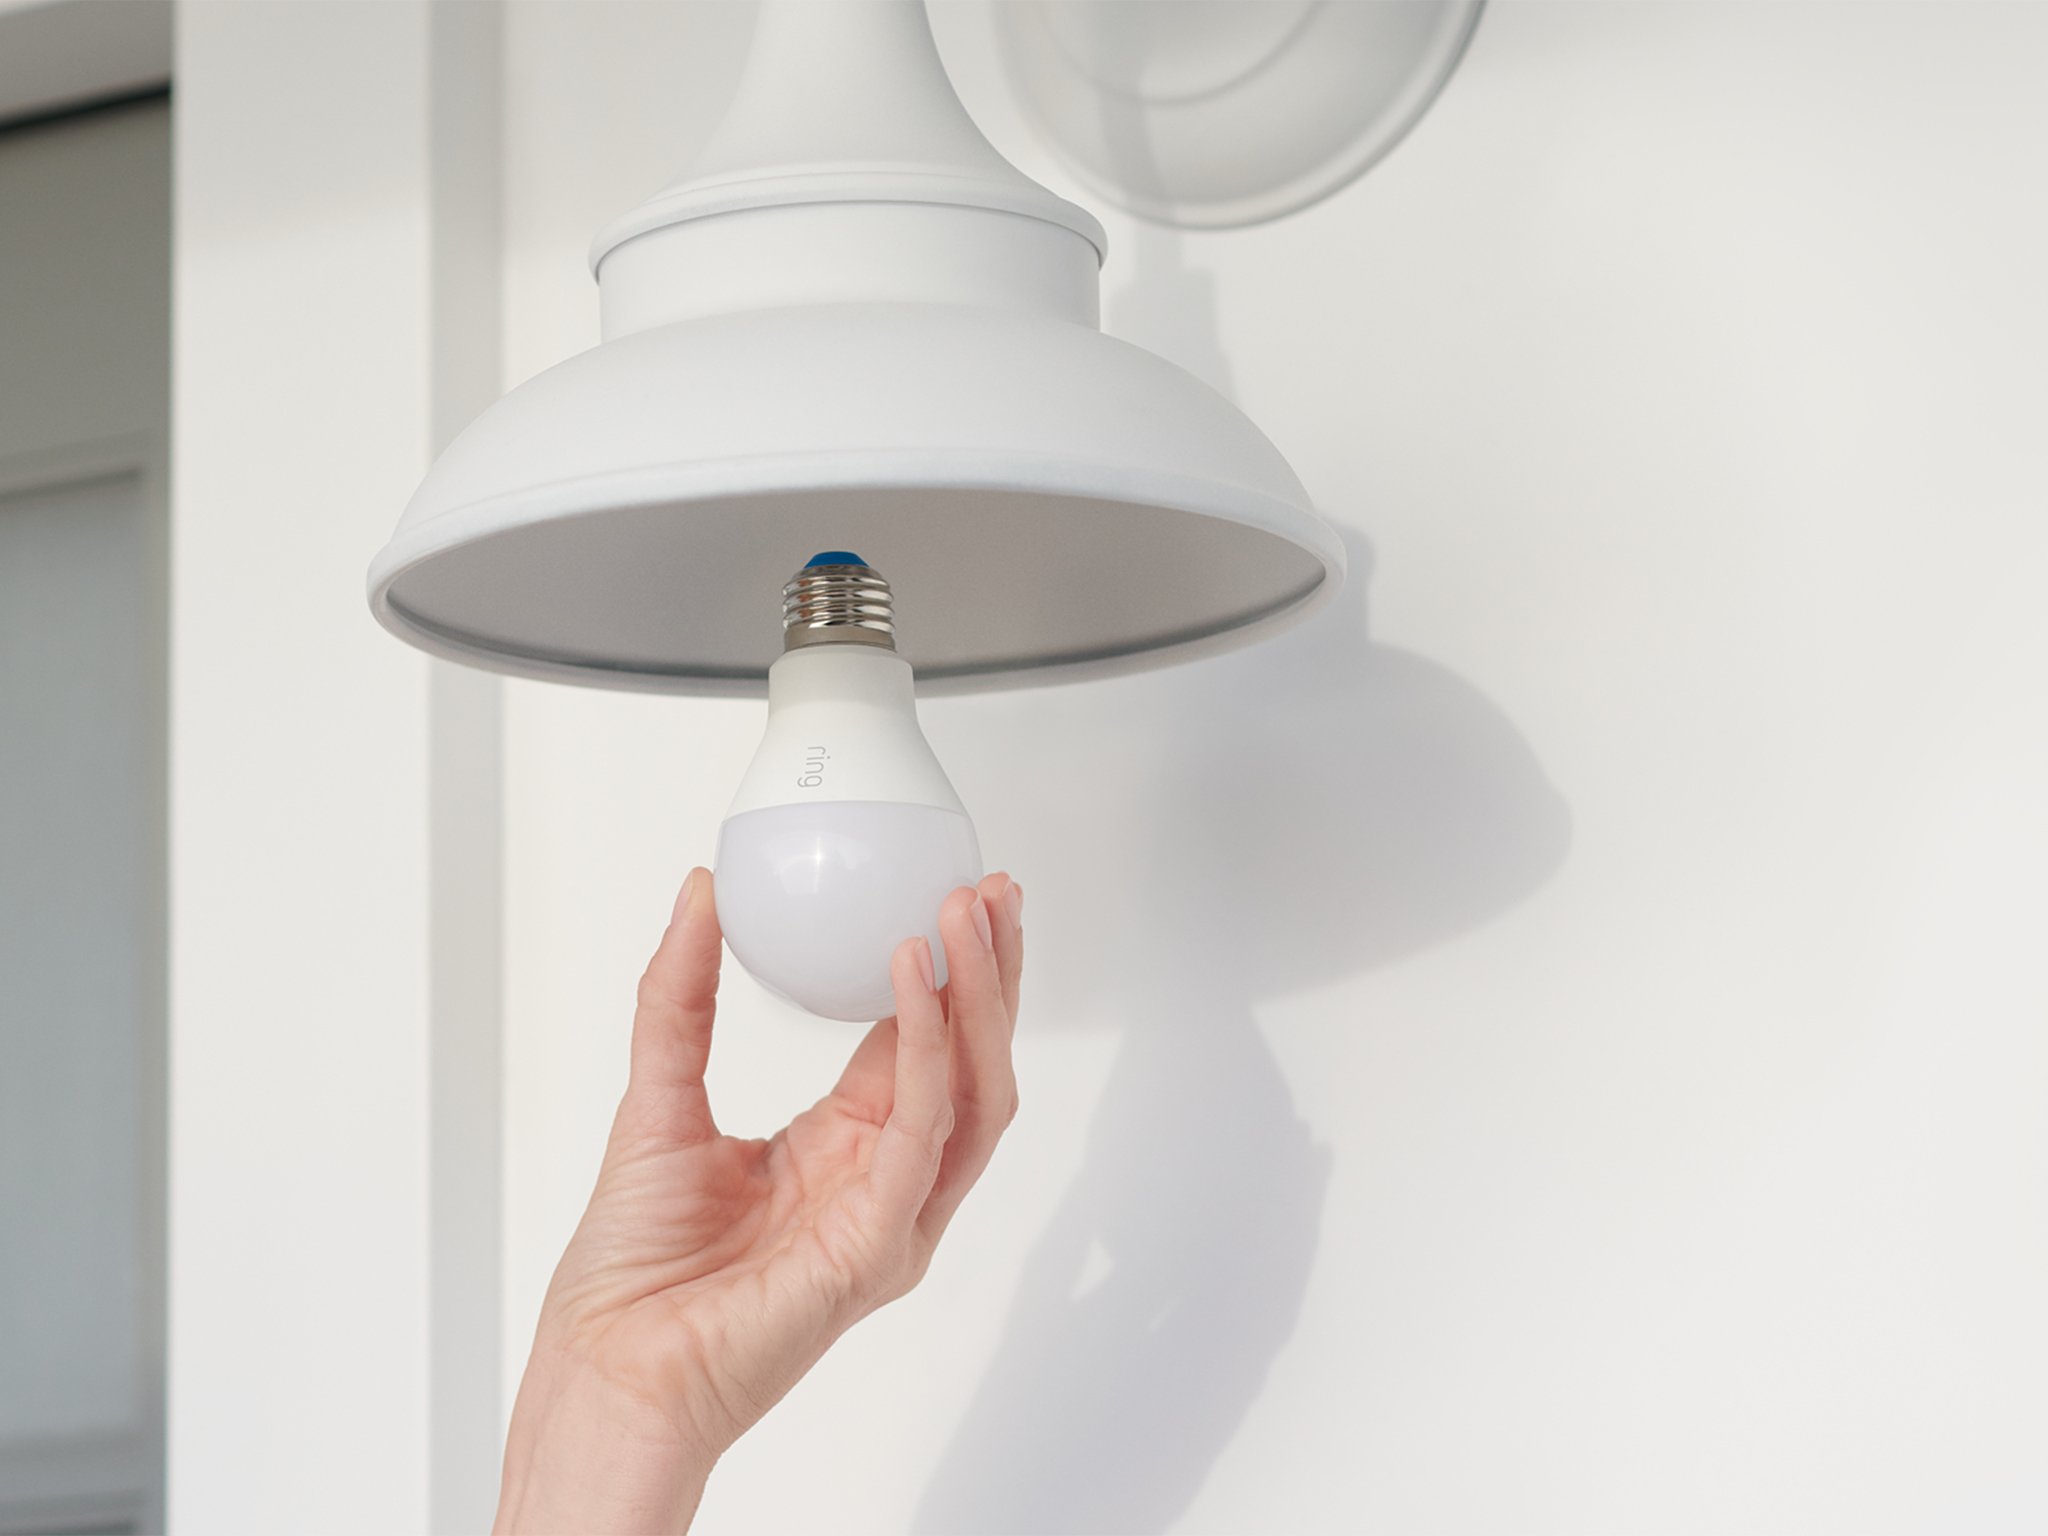 Ring’s new smart home gear includes connected indoor and outdoor bulbs